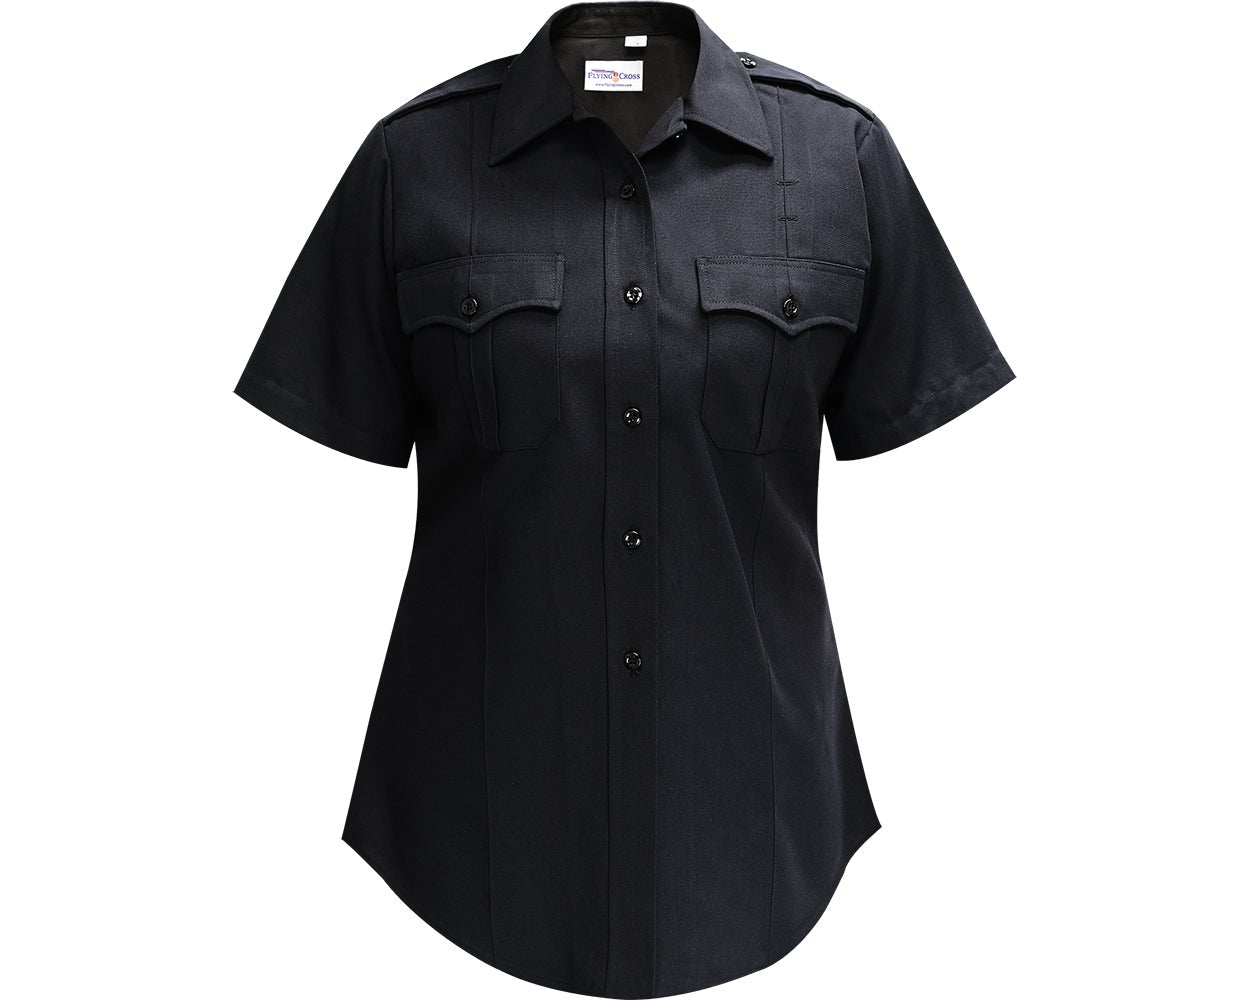 Flying Cross Deluxe Tropical Women's Short Sleeve Shirt with Traditional Collar 154R66 - Black, 36